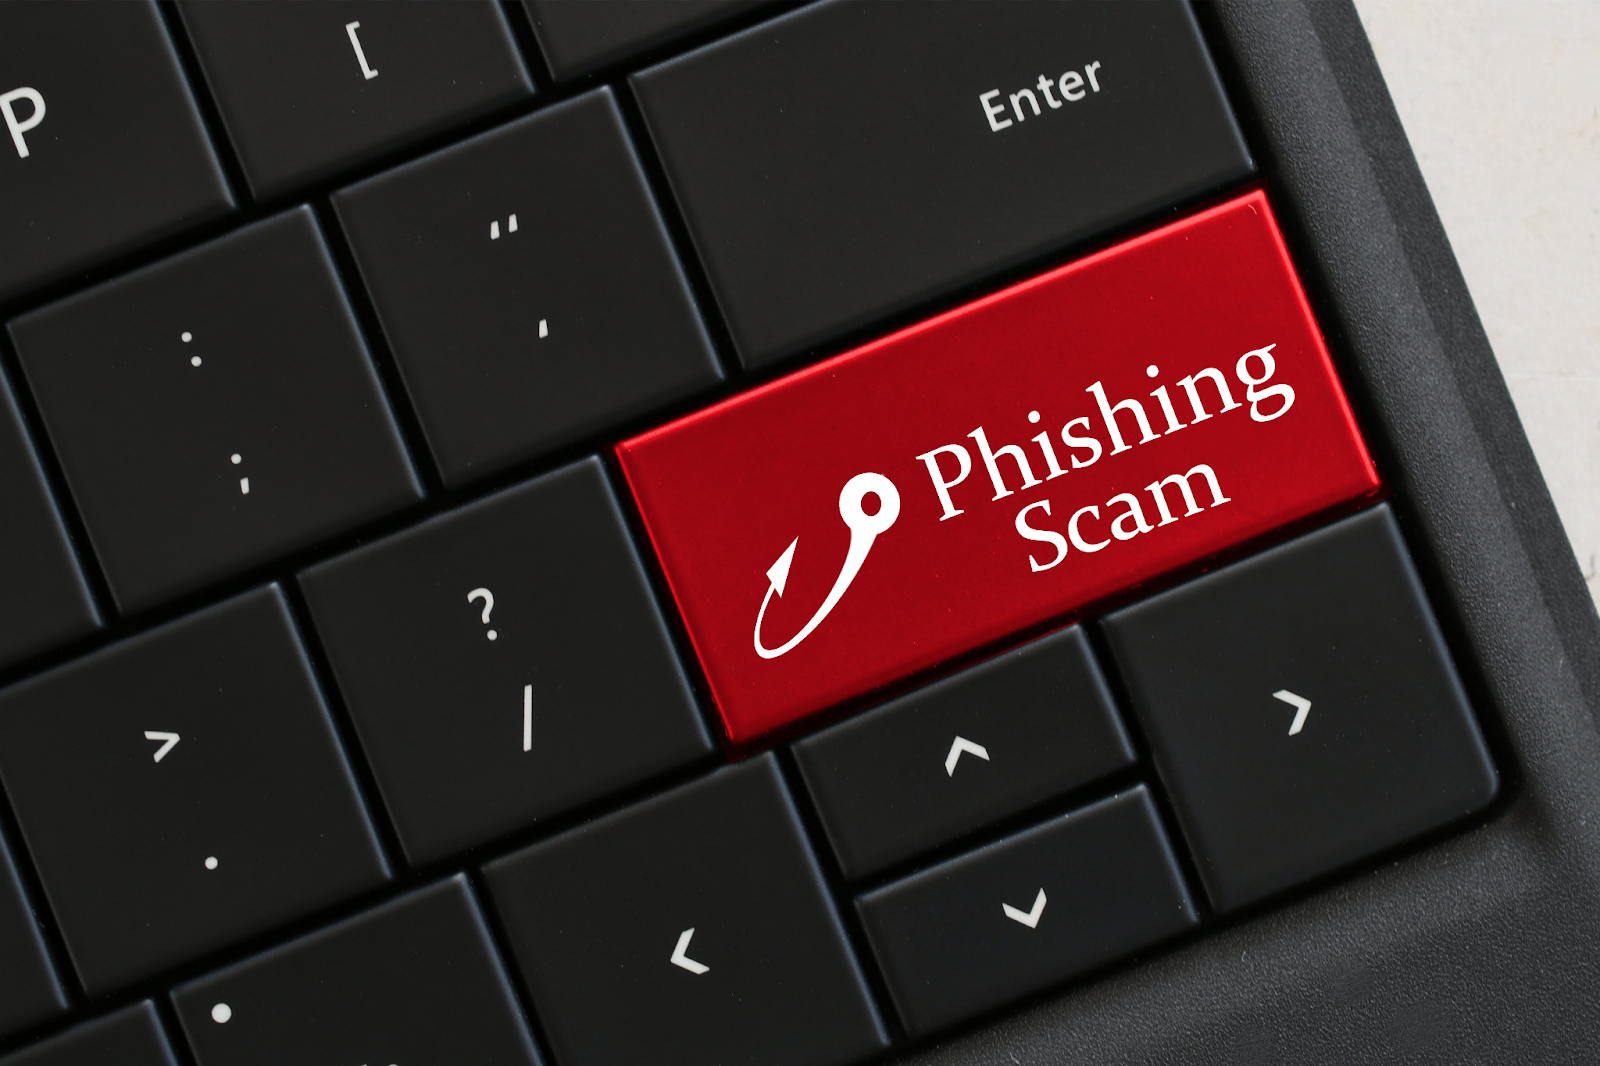 Beware of phishing scam emails by using cybersecurity risk management.